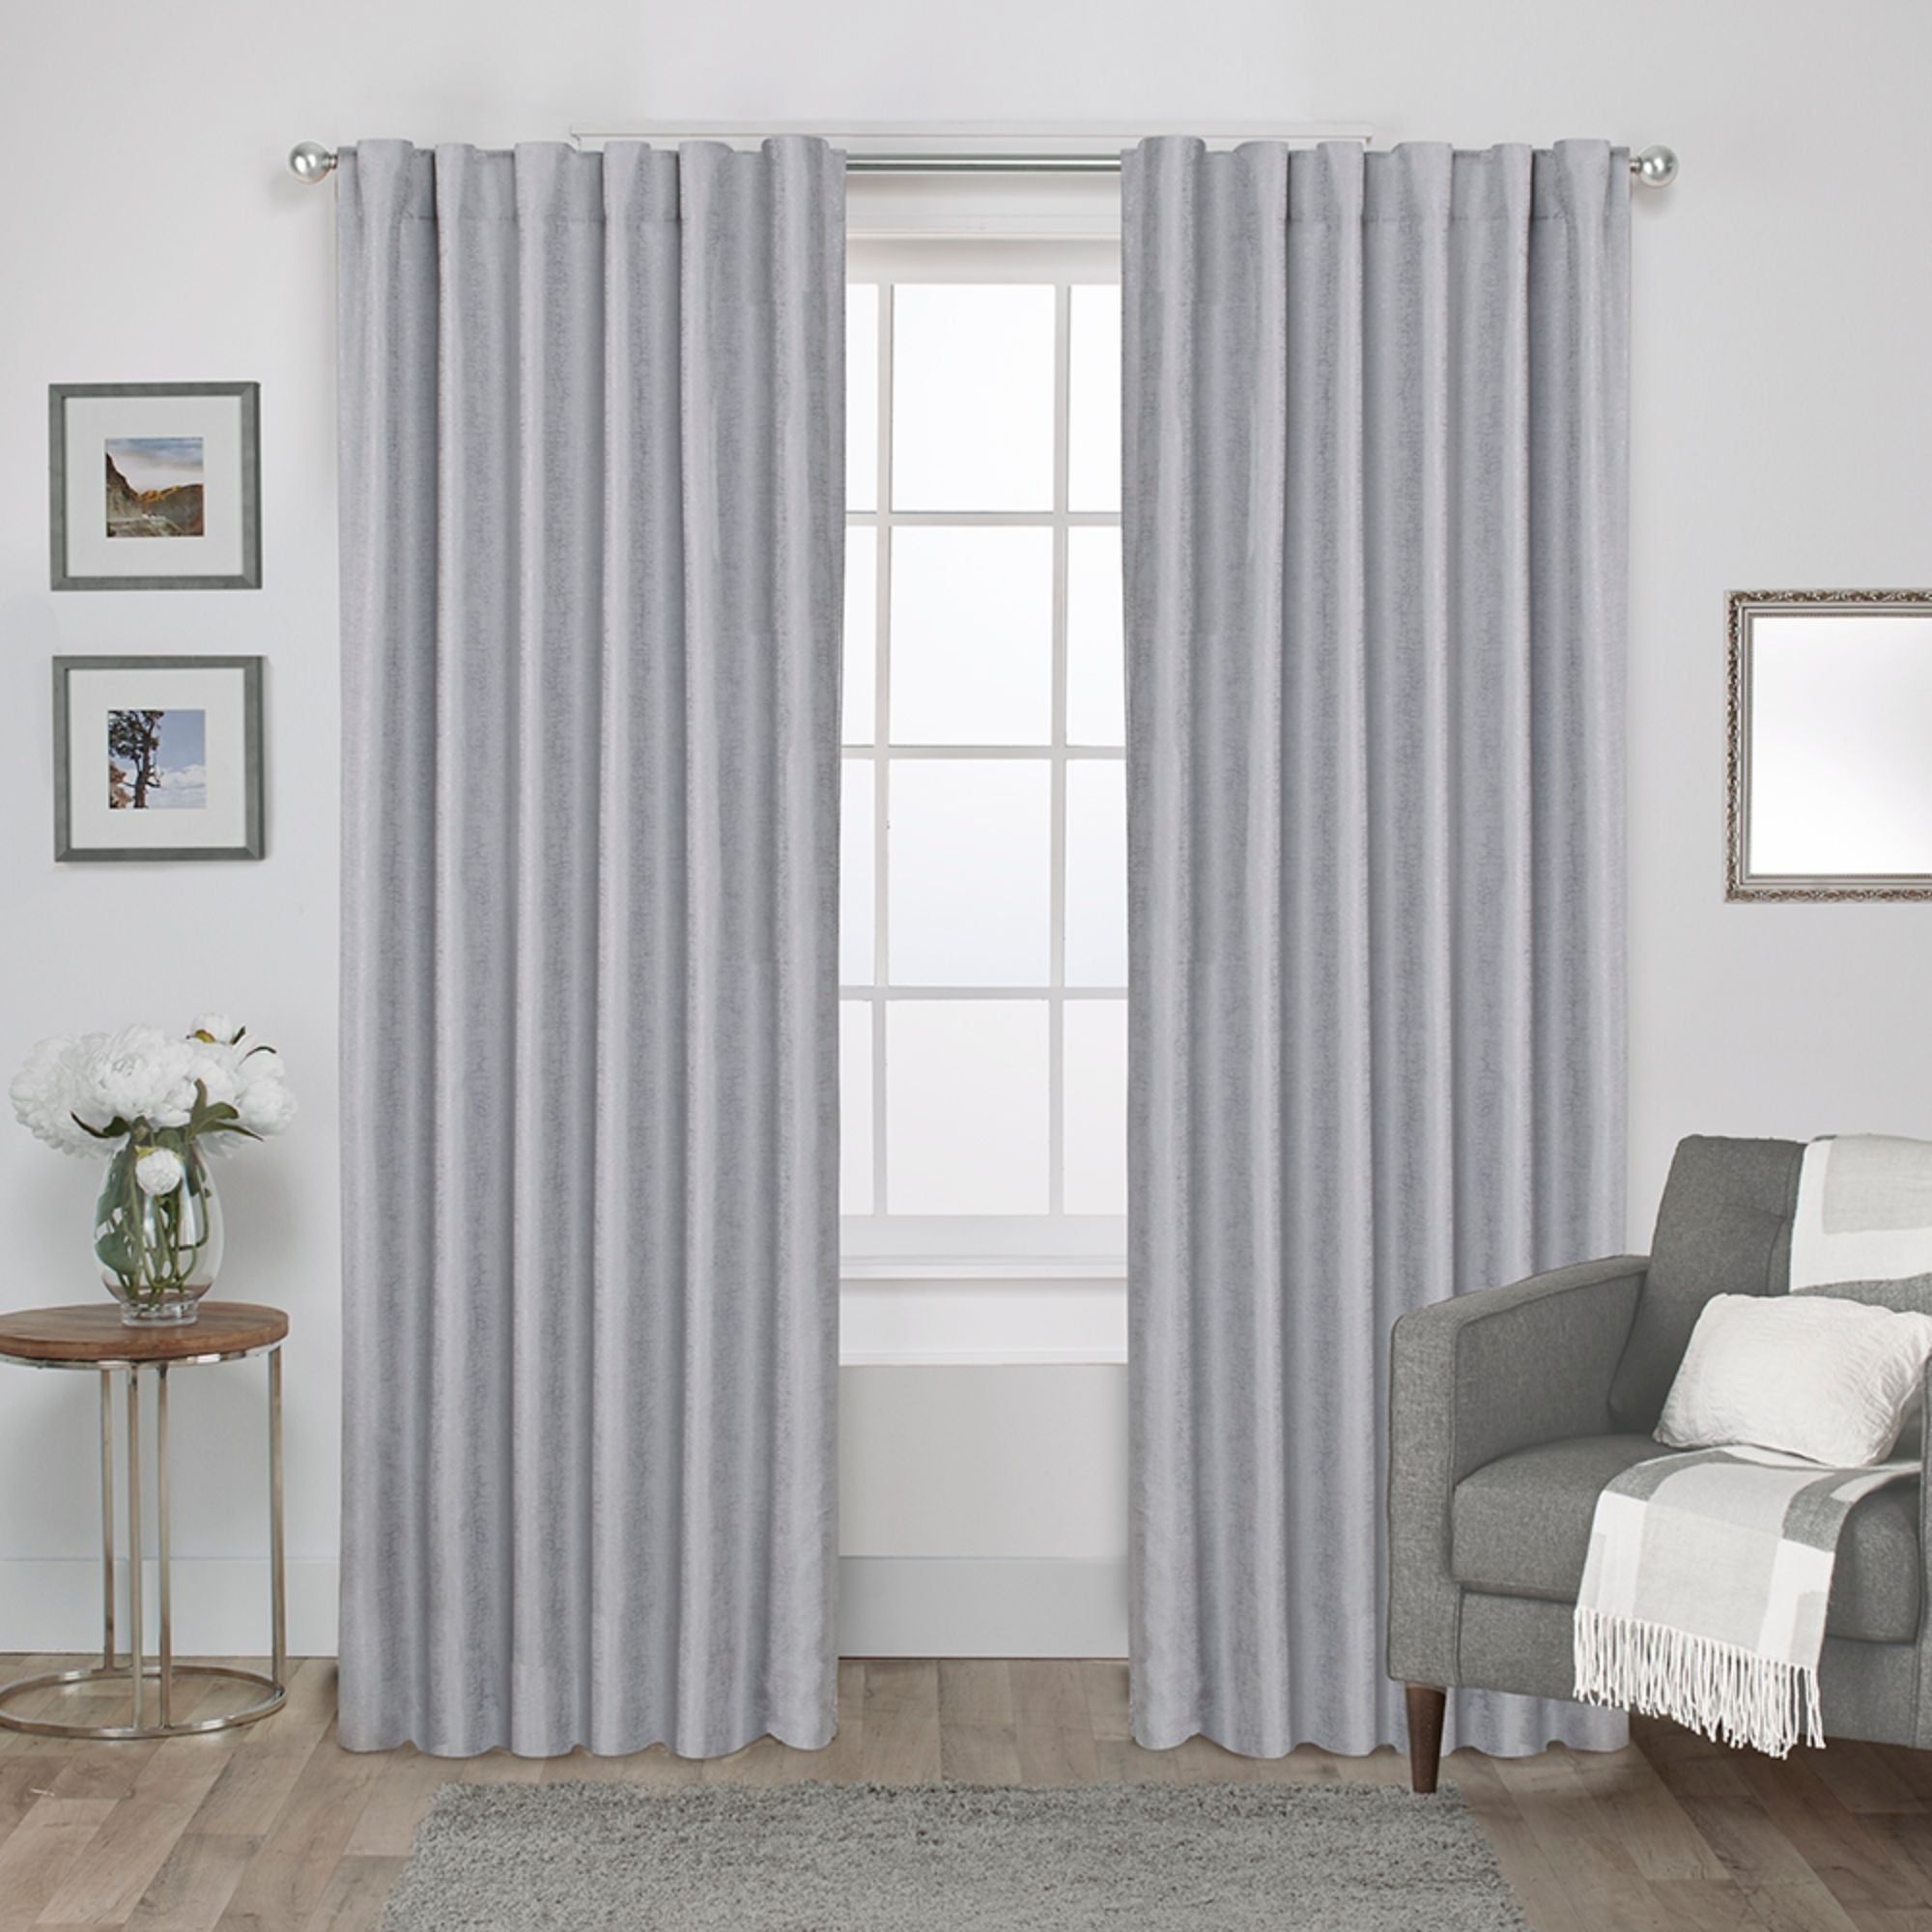 Ati Home Zeus Thermal Woven Blackout Back Tab Top Curtain Panel Pair In Cyrus Thermal Blackout Back Tab Curtain Panels (View 4 of 20)